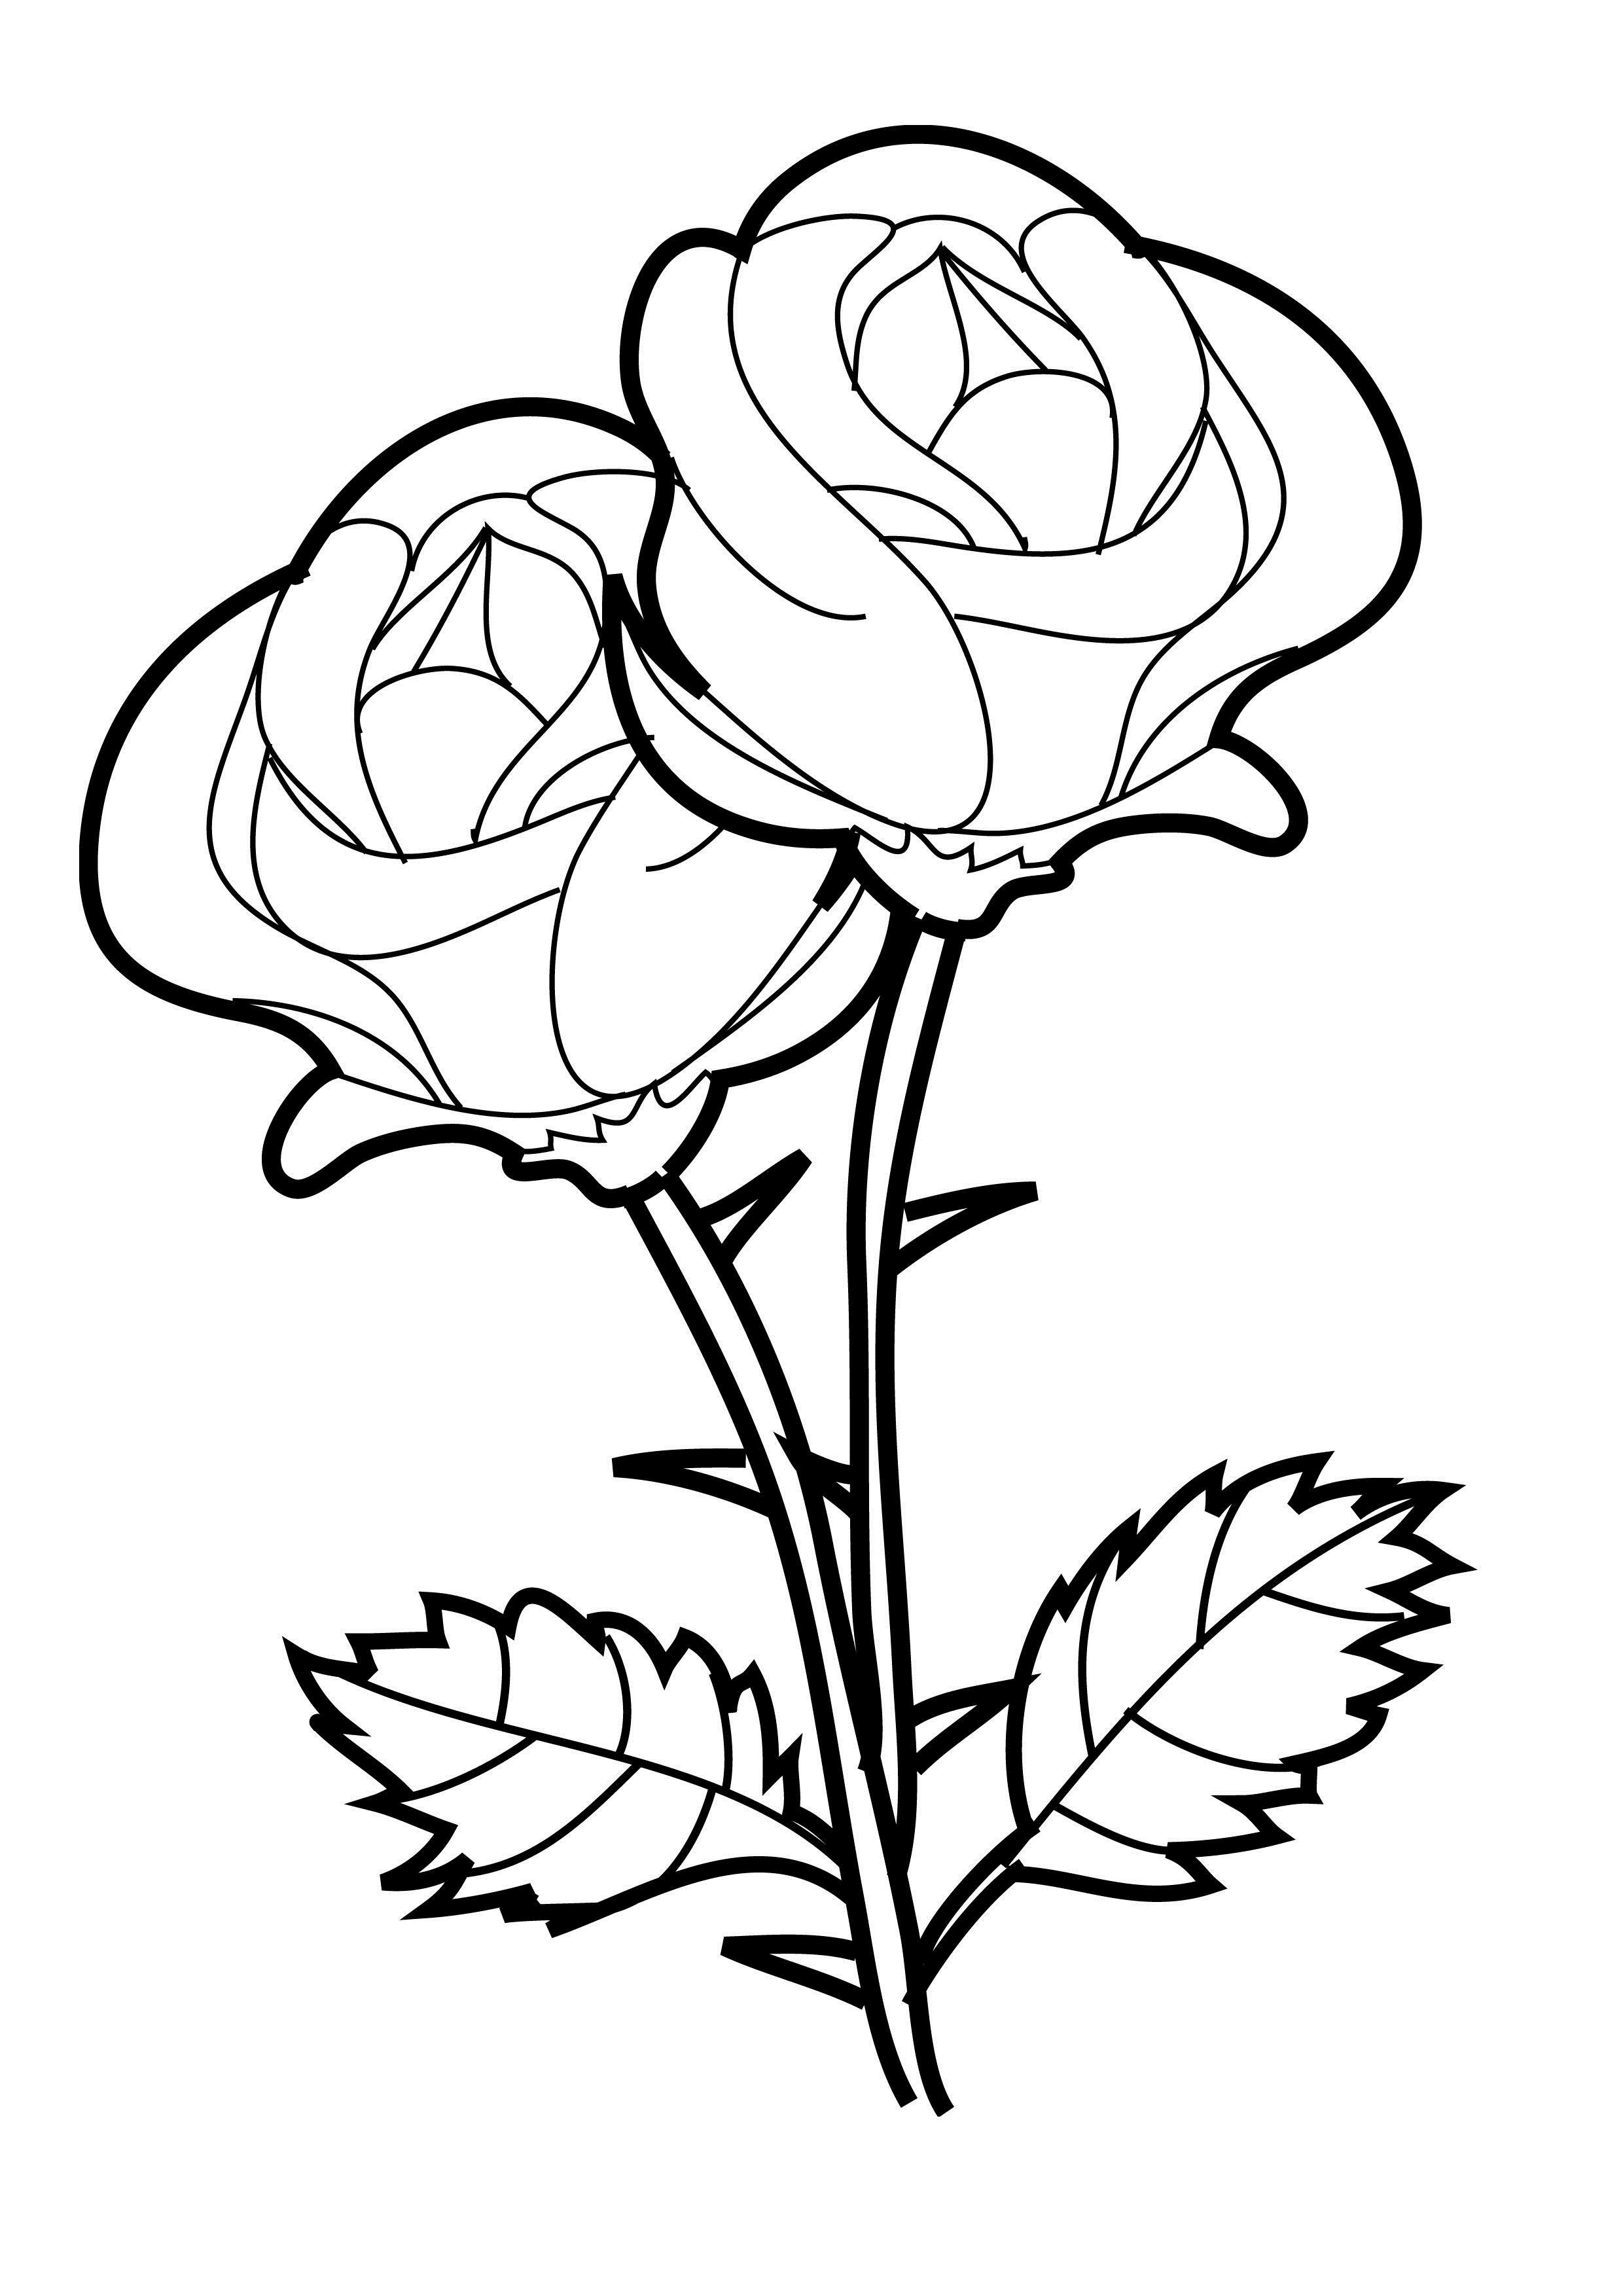 Rose-two-flowers-Coloring-Page